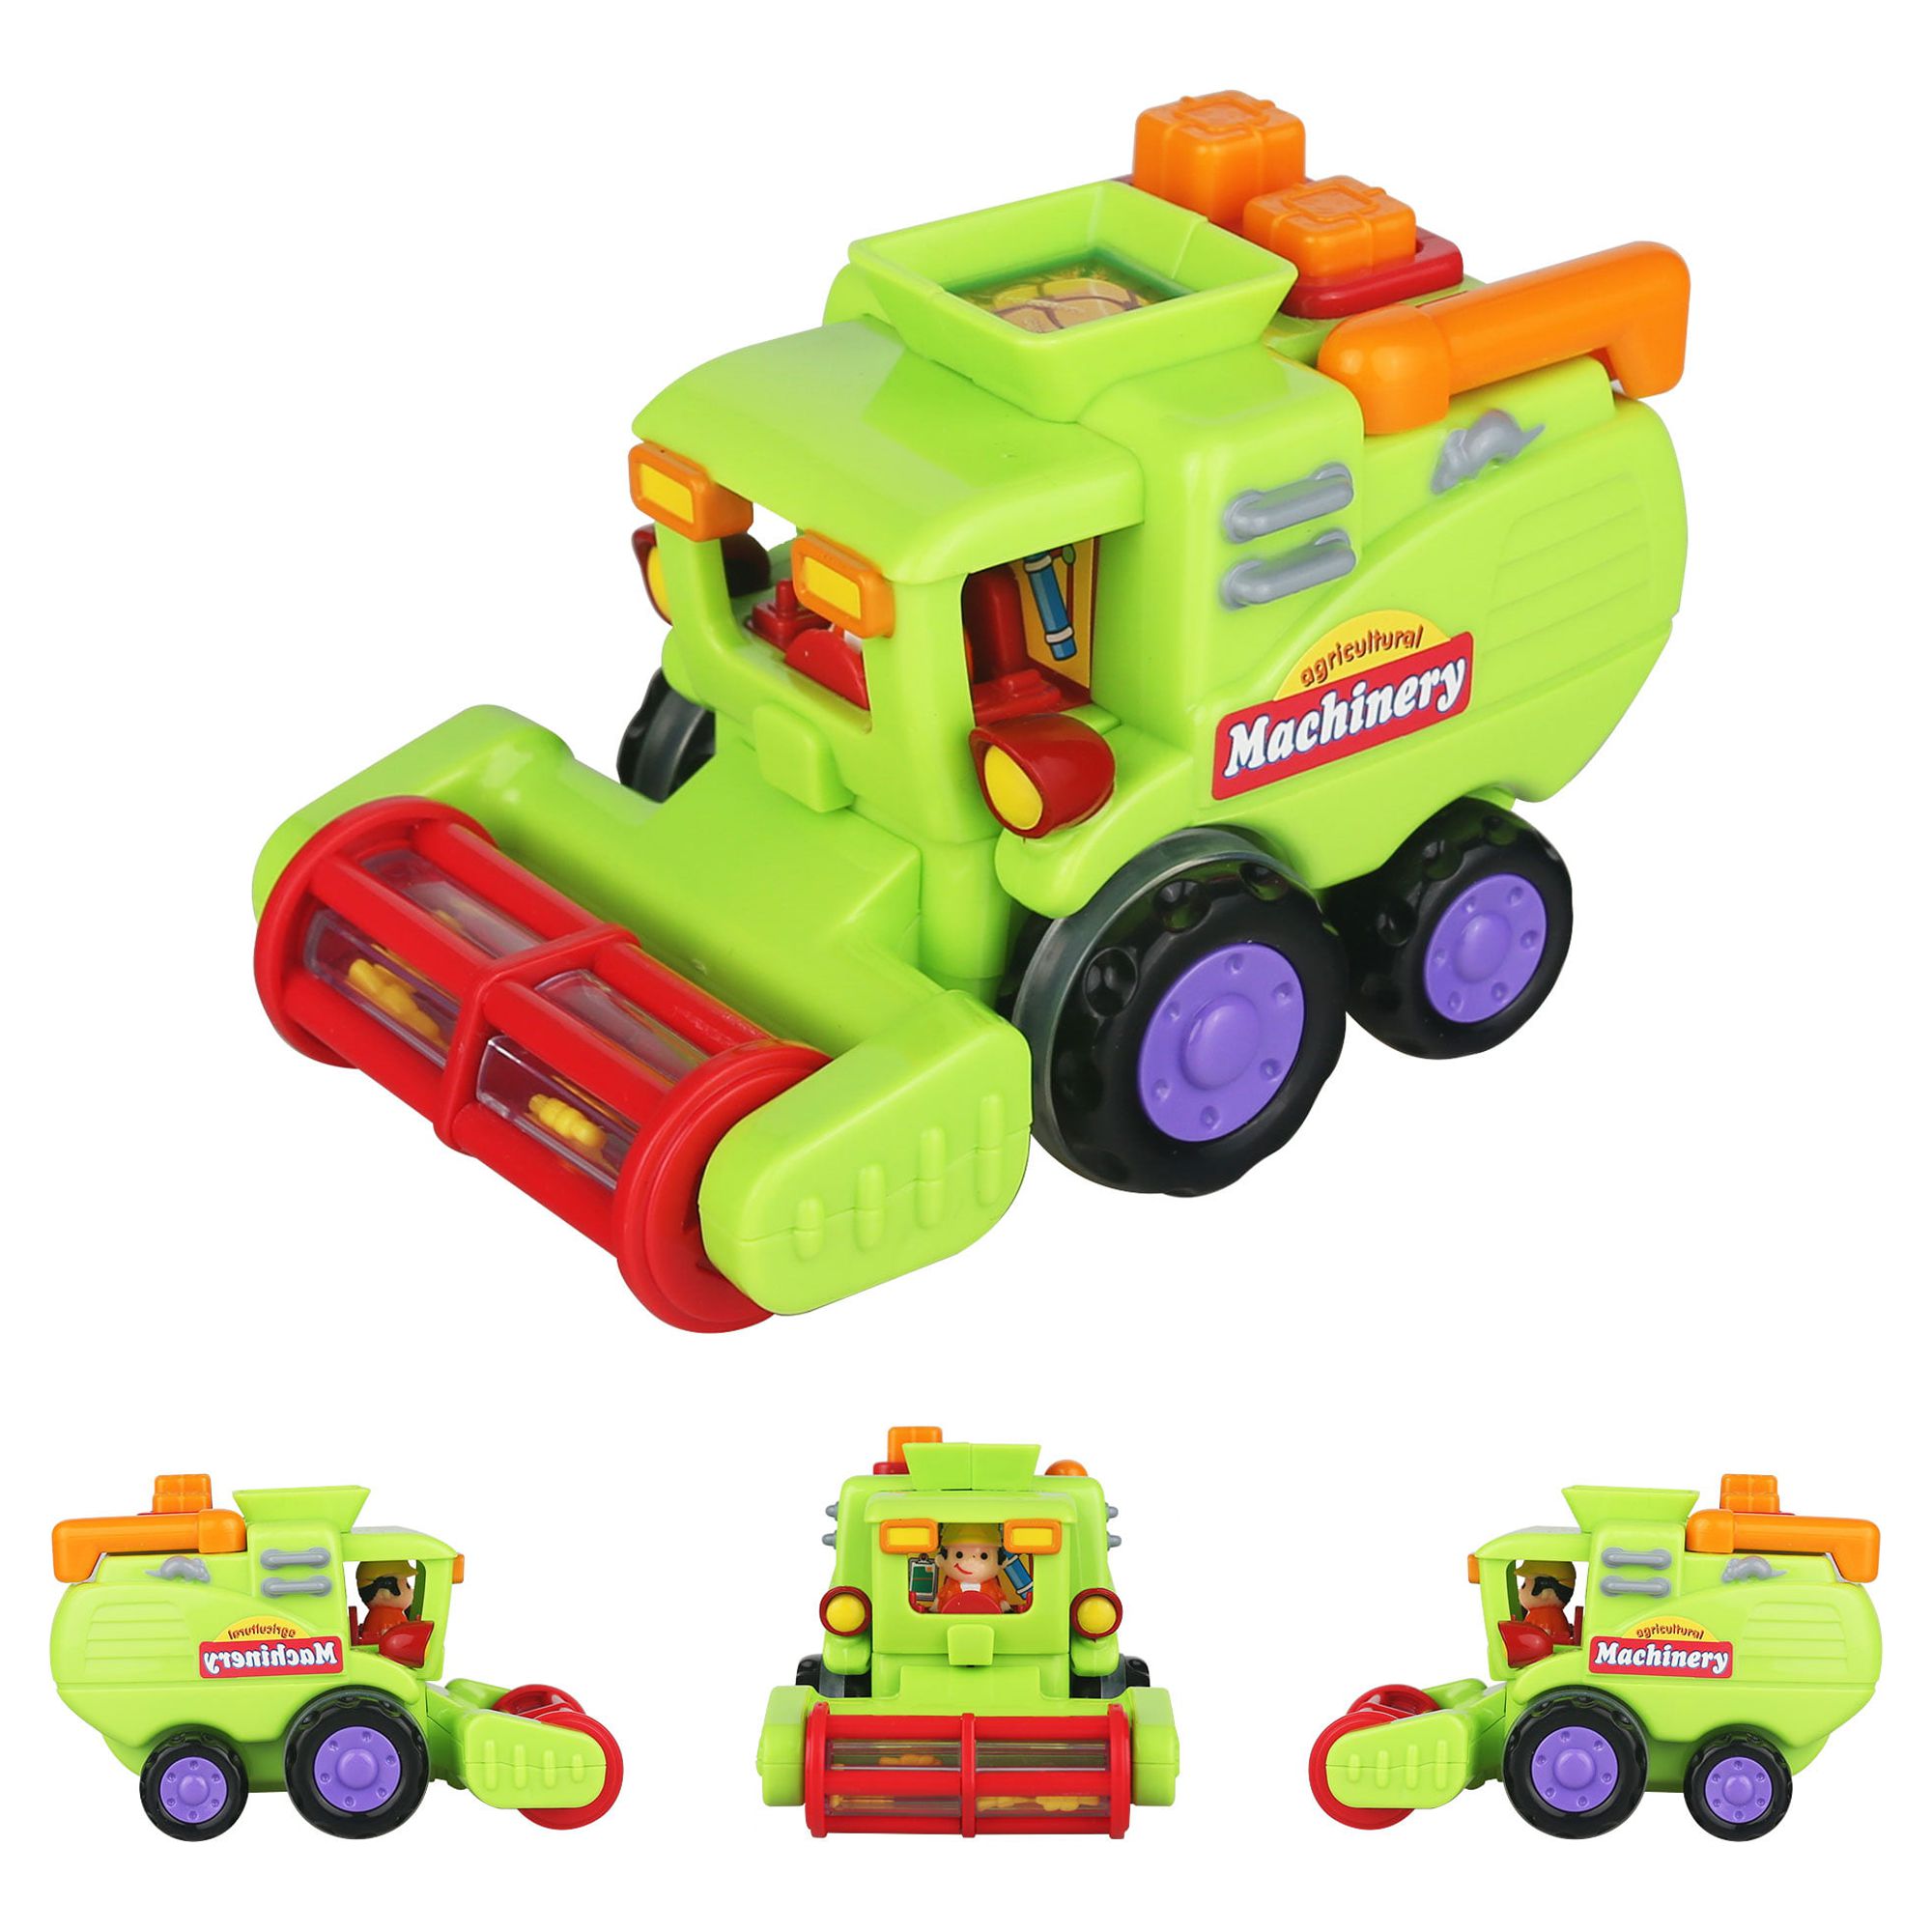 CifToys Friction Powered Push and Go Toddler Construction Toys Truck Vehicle Playset, Toys for 1 2 3 Year Old Boy Toys Gifts (3 Pieces) - image 3 of 10